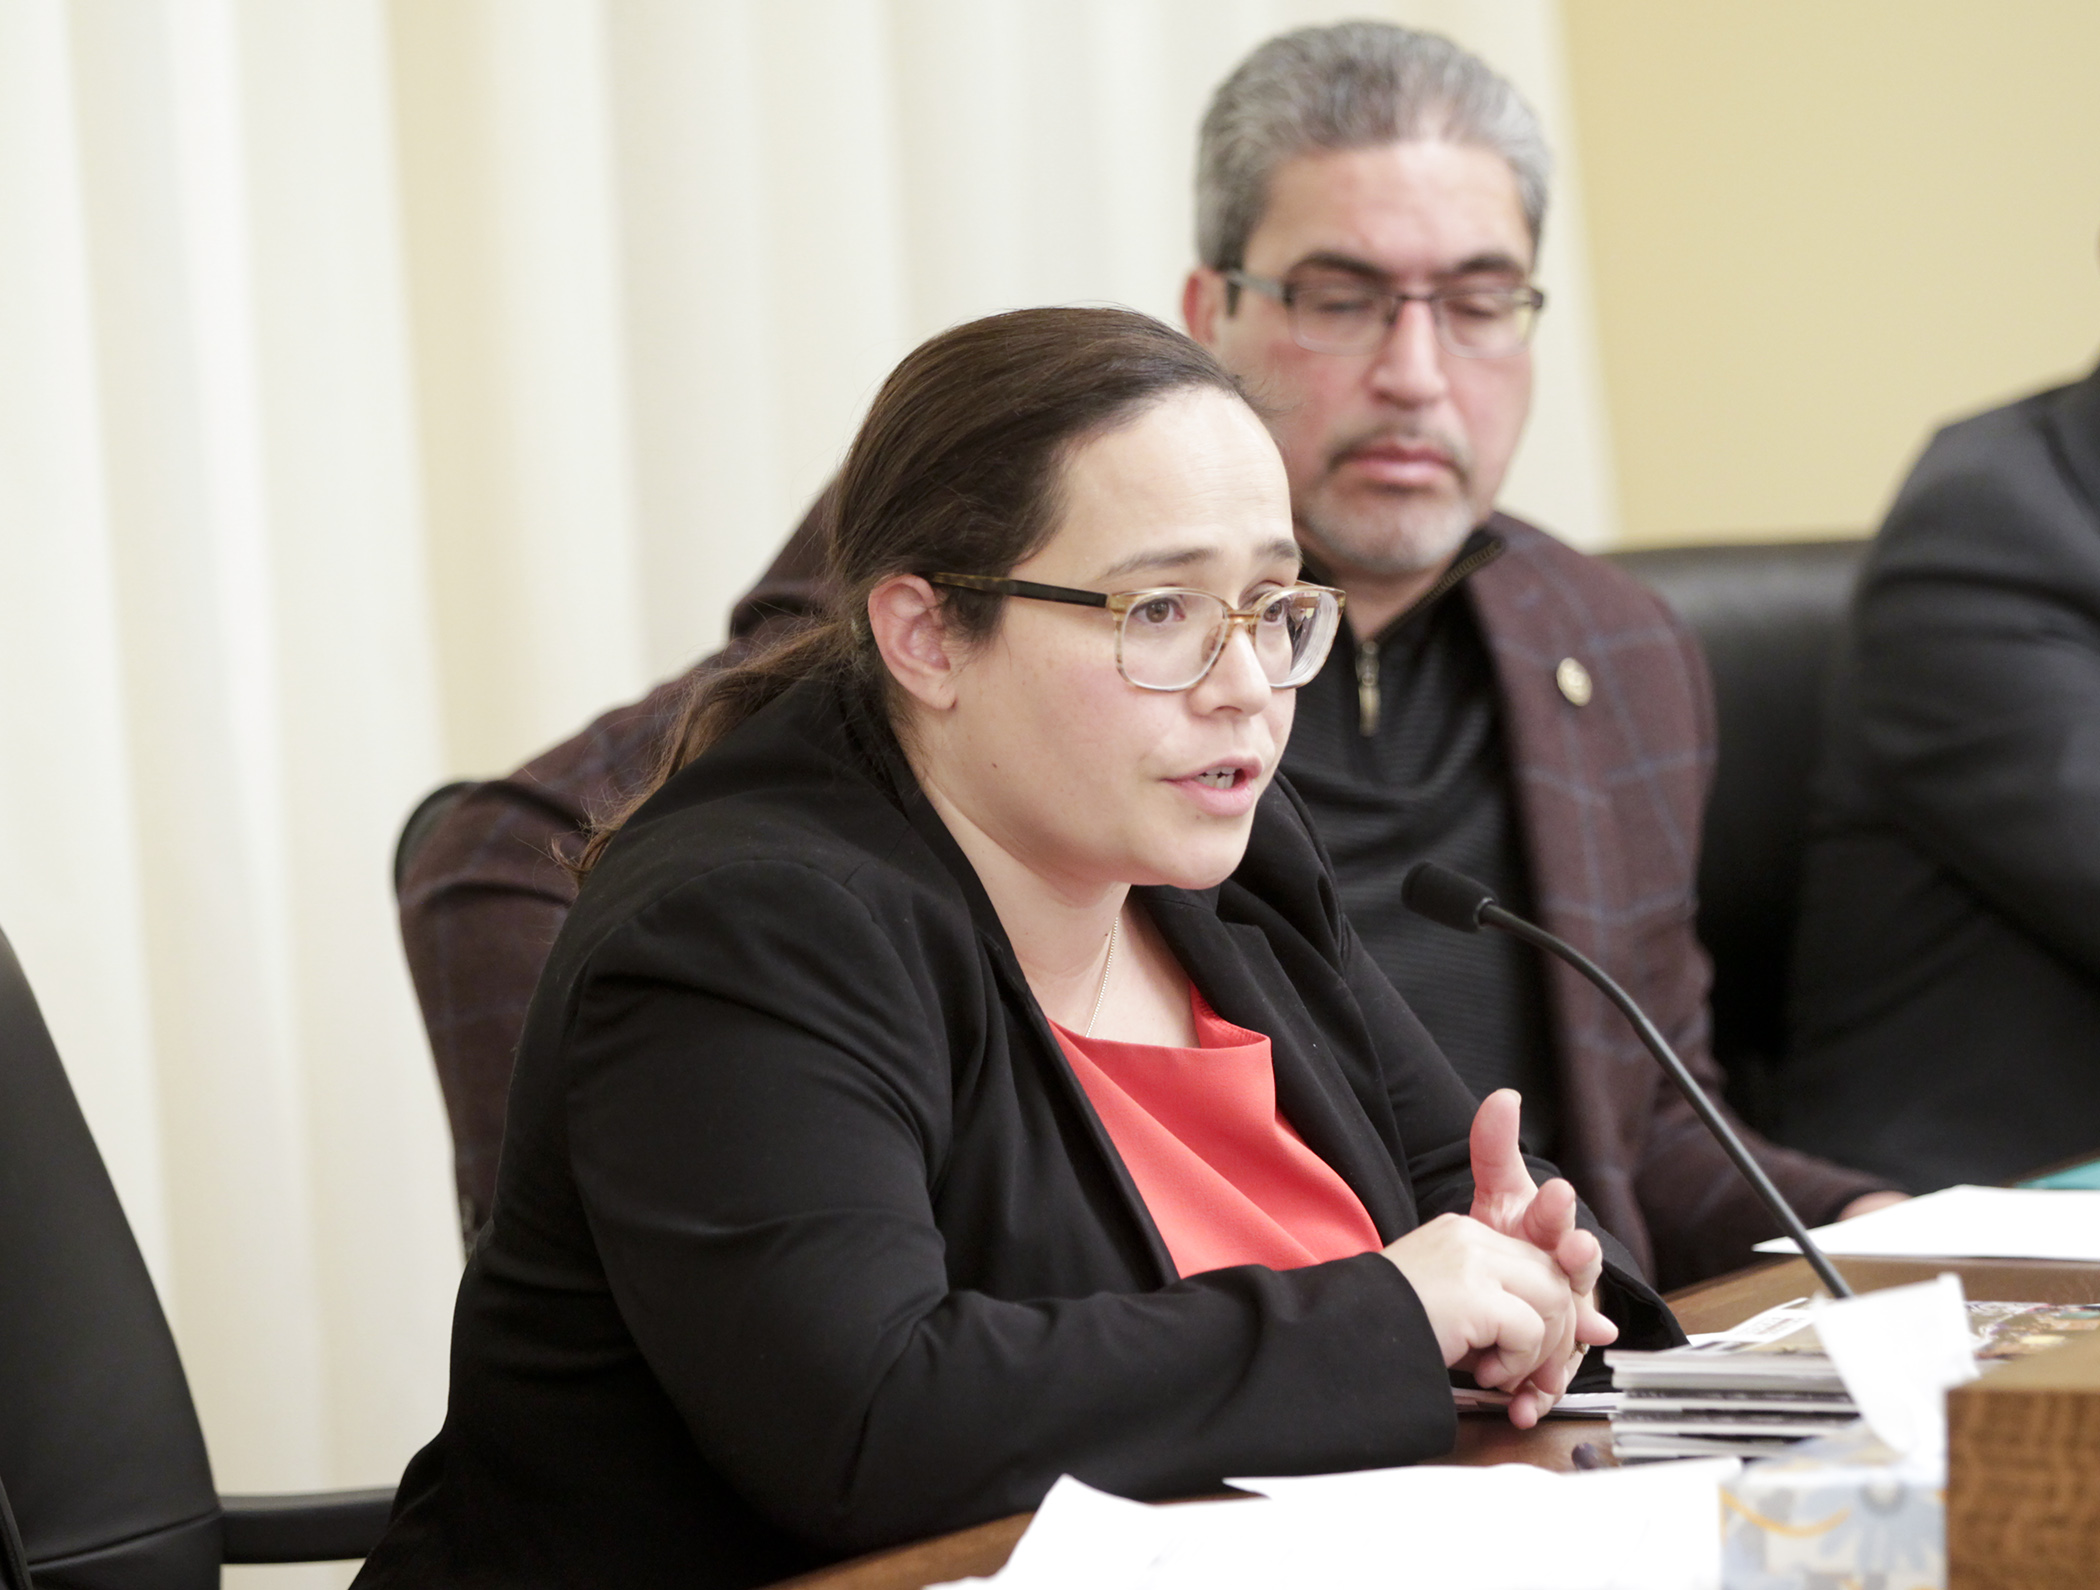 Jenny Srey relates her experience trying to seek post-conviction relief for her husband during Feb. 7 testimony on HF739, sponsored by Rep. Carlos Mariani, right. Photo by Paul Battaglia